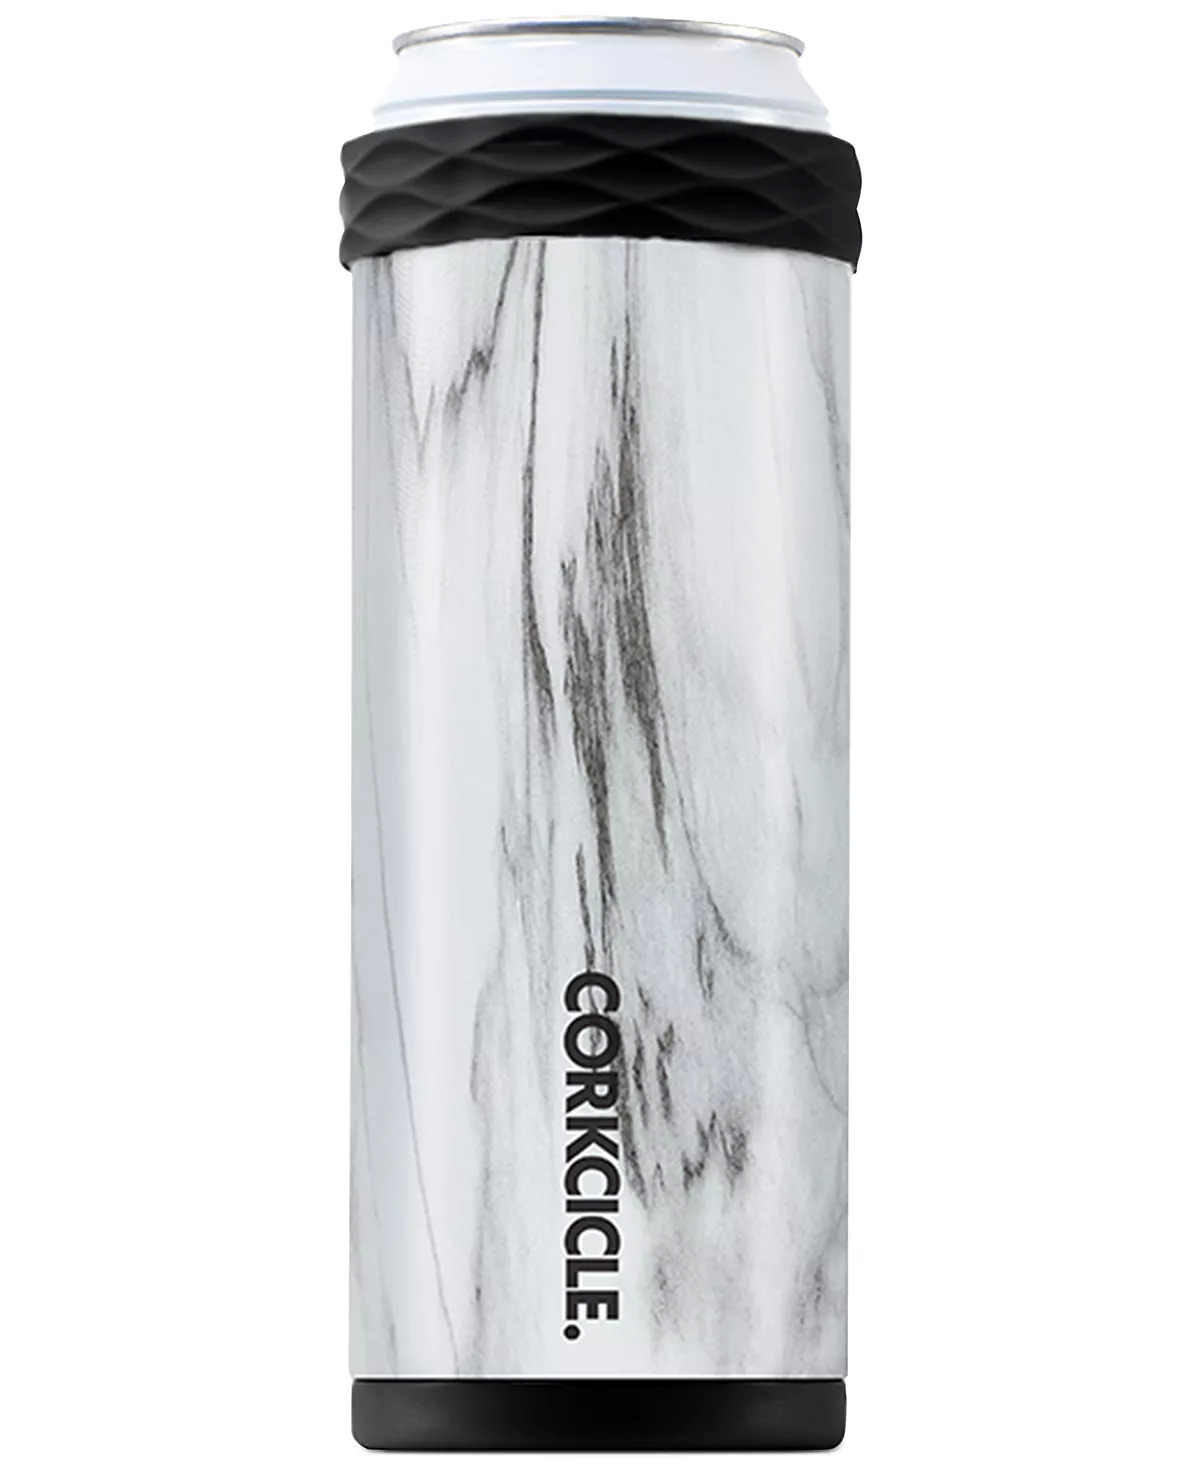 Corkcicle Mugs & Tumblers: 12-Oz Slim Artican Cooler $6.23, 12-Oz Harry Potter Stemless Tumbler $8.73 & More + Free Store Pickup at Macy's or FS on $25+